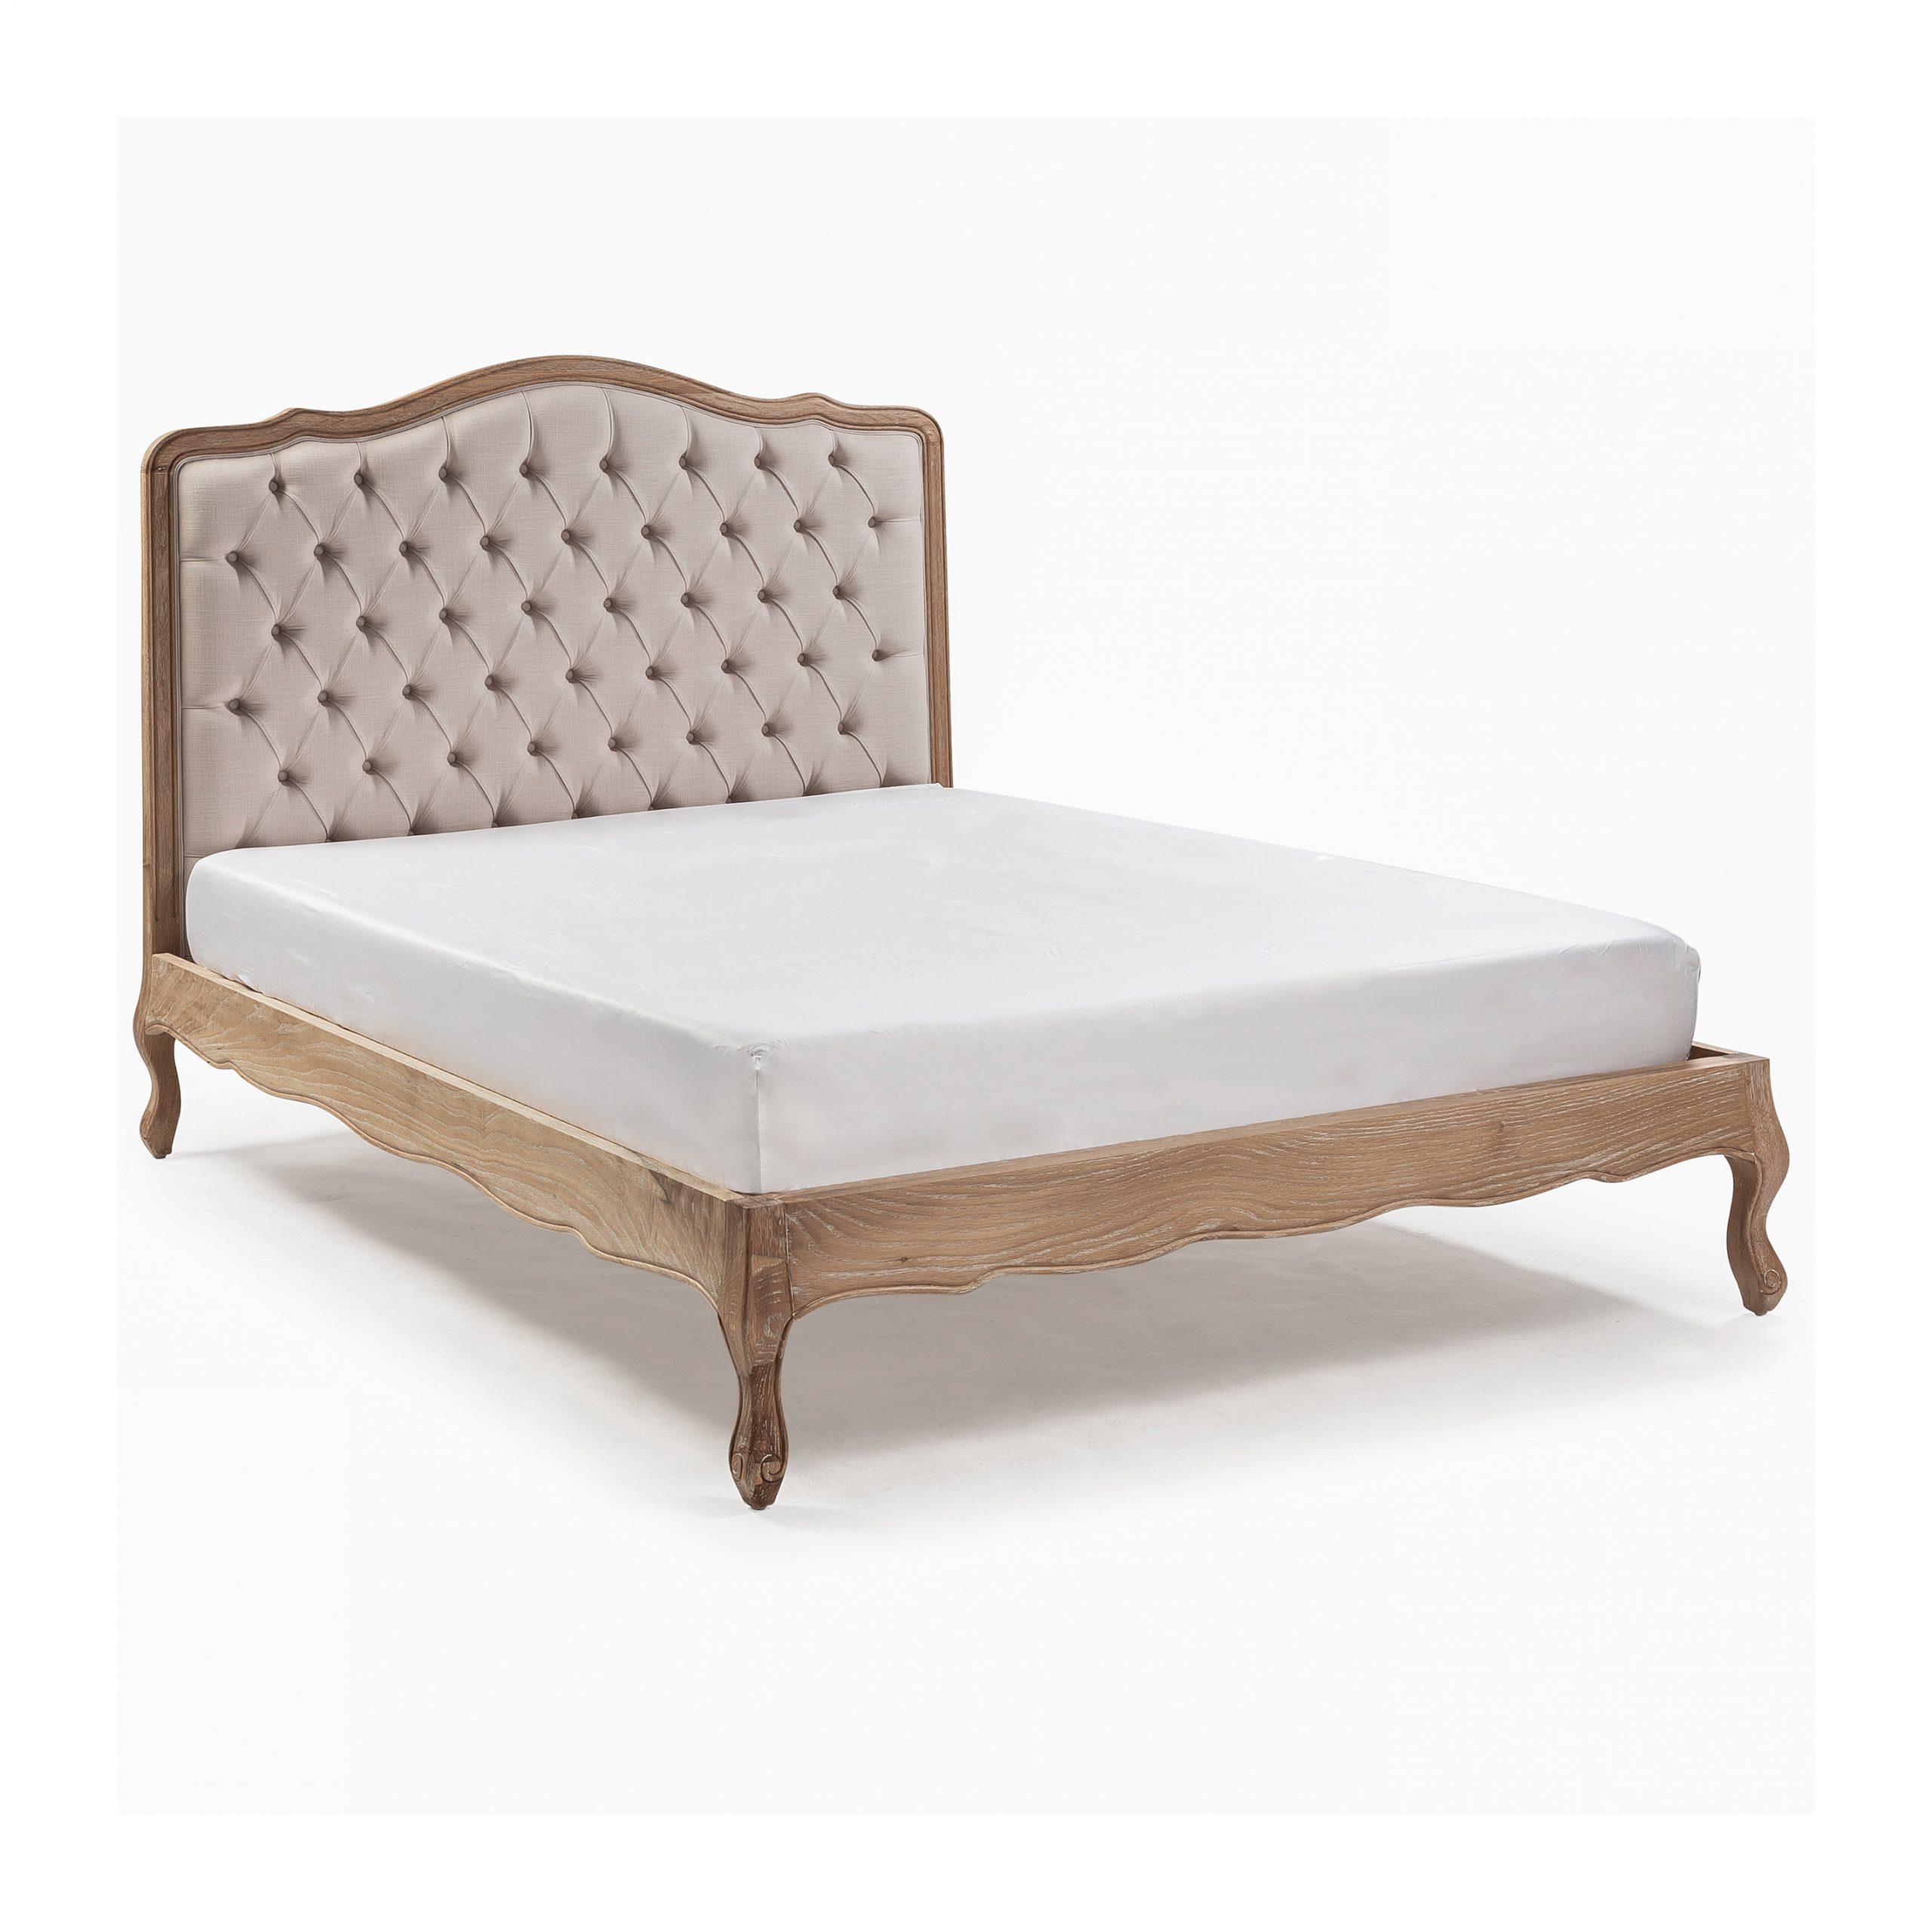 Eléa French Weathered Limed Oak Upholstered Button Back Low Foot Board Bed – Double Size